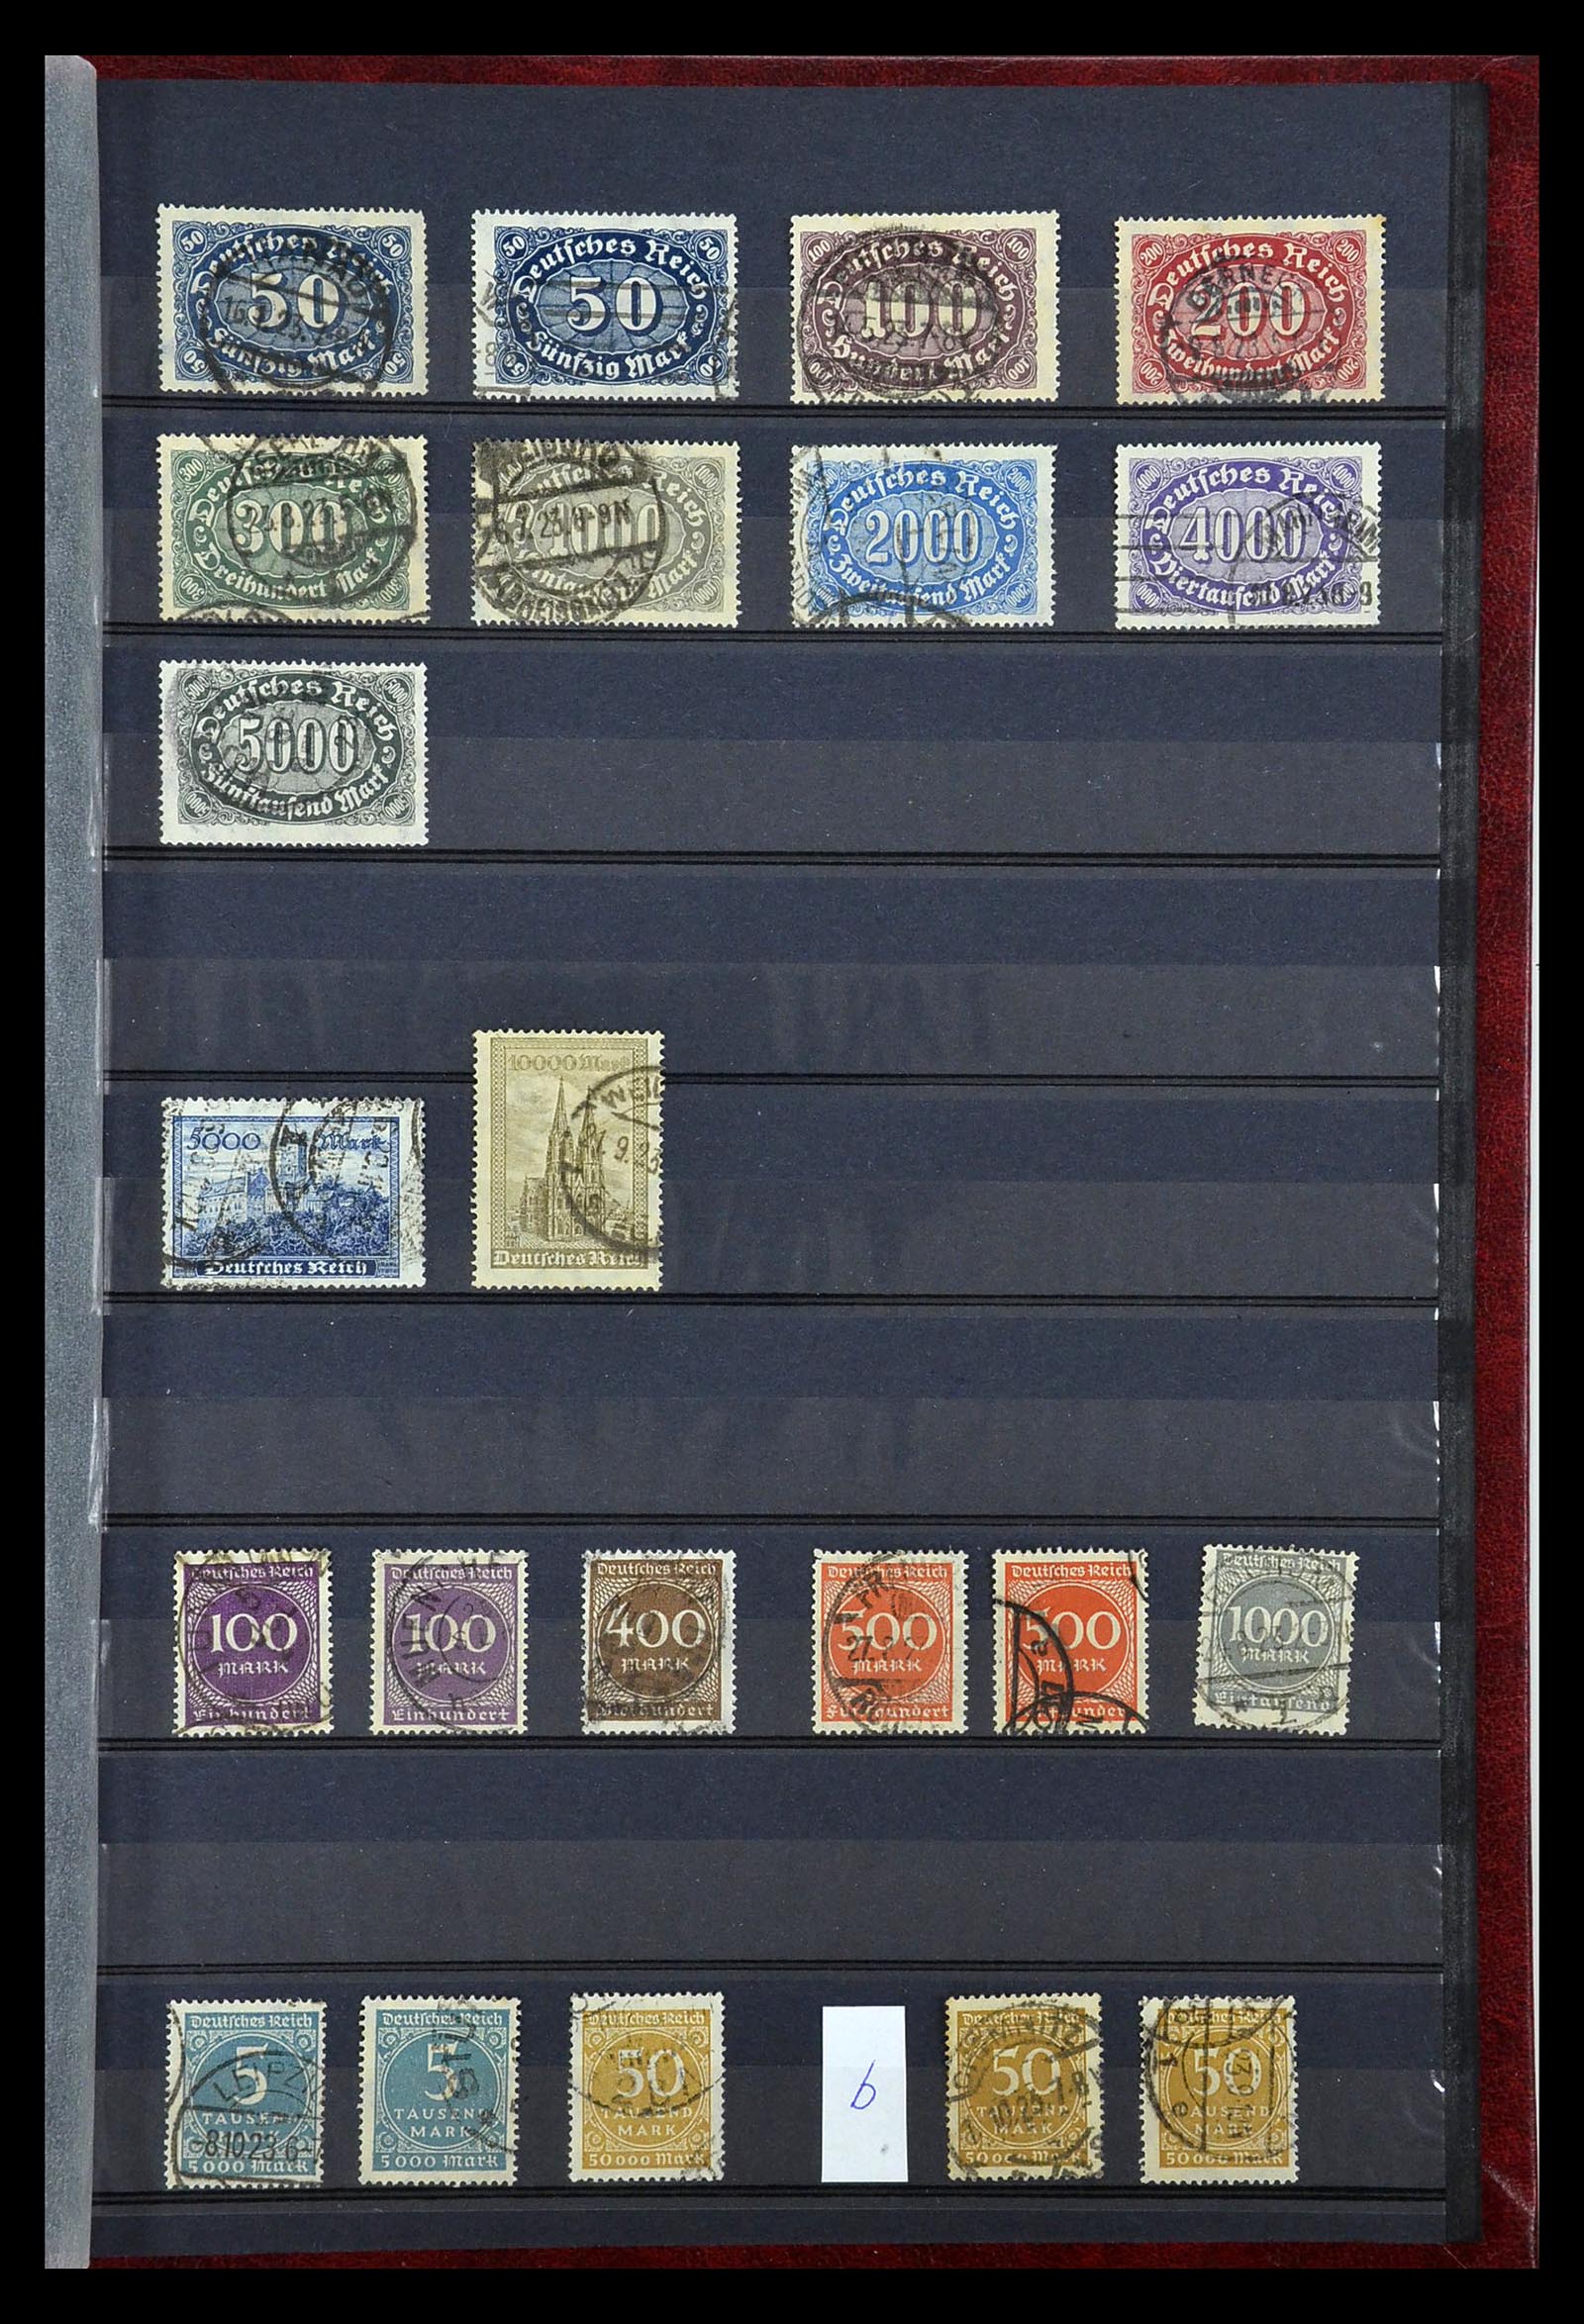 35121 005 - Stamp Collection 35121 German Reich inflation 1920-1923.